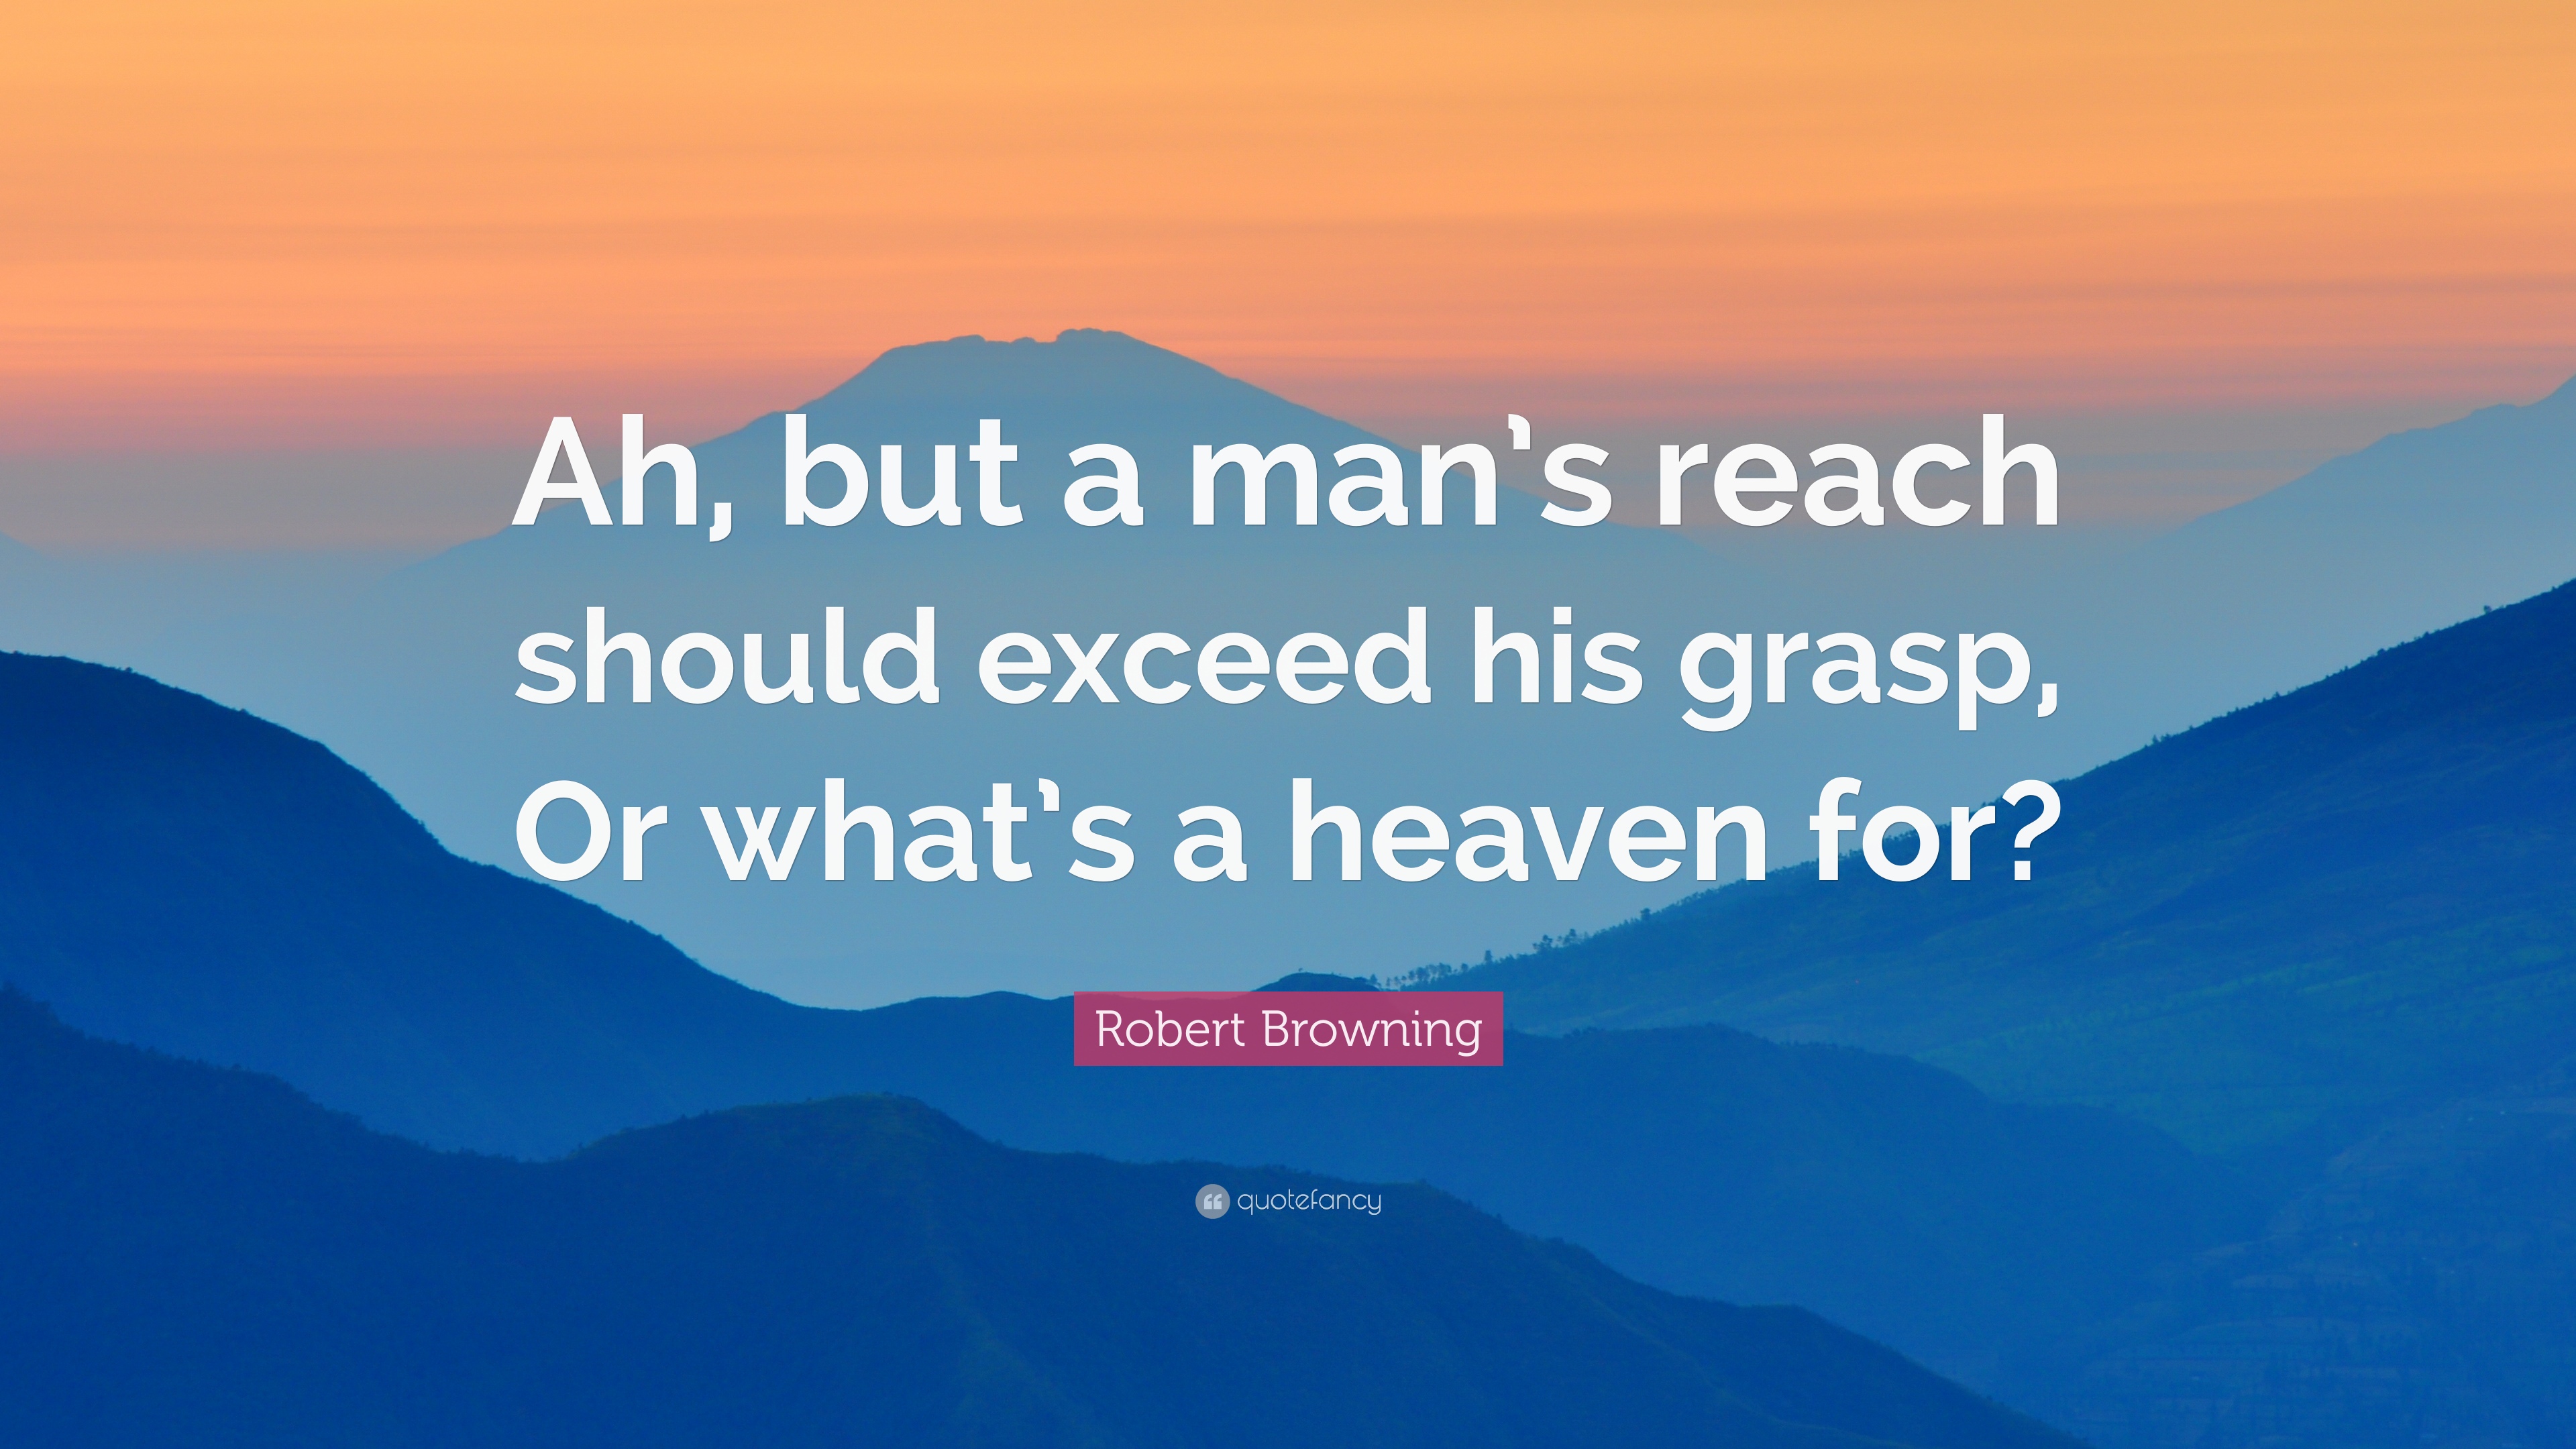 Robert Browning Quote: “Ah, but a man's reach should exceed his ...